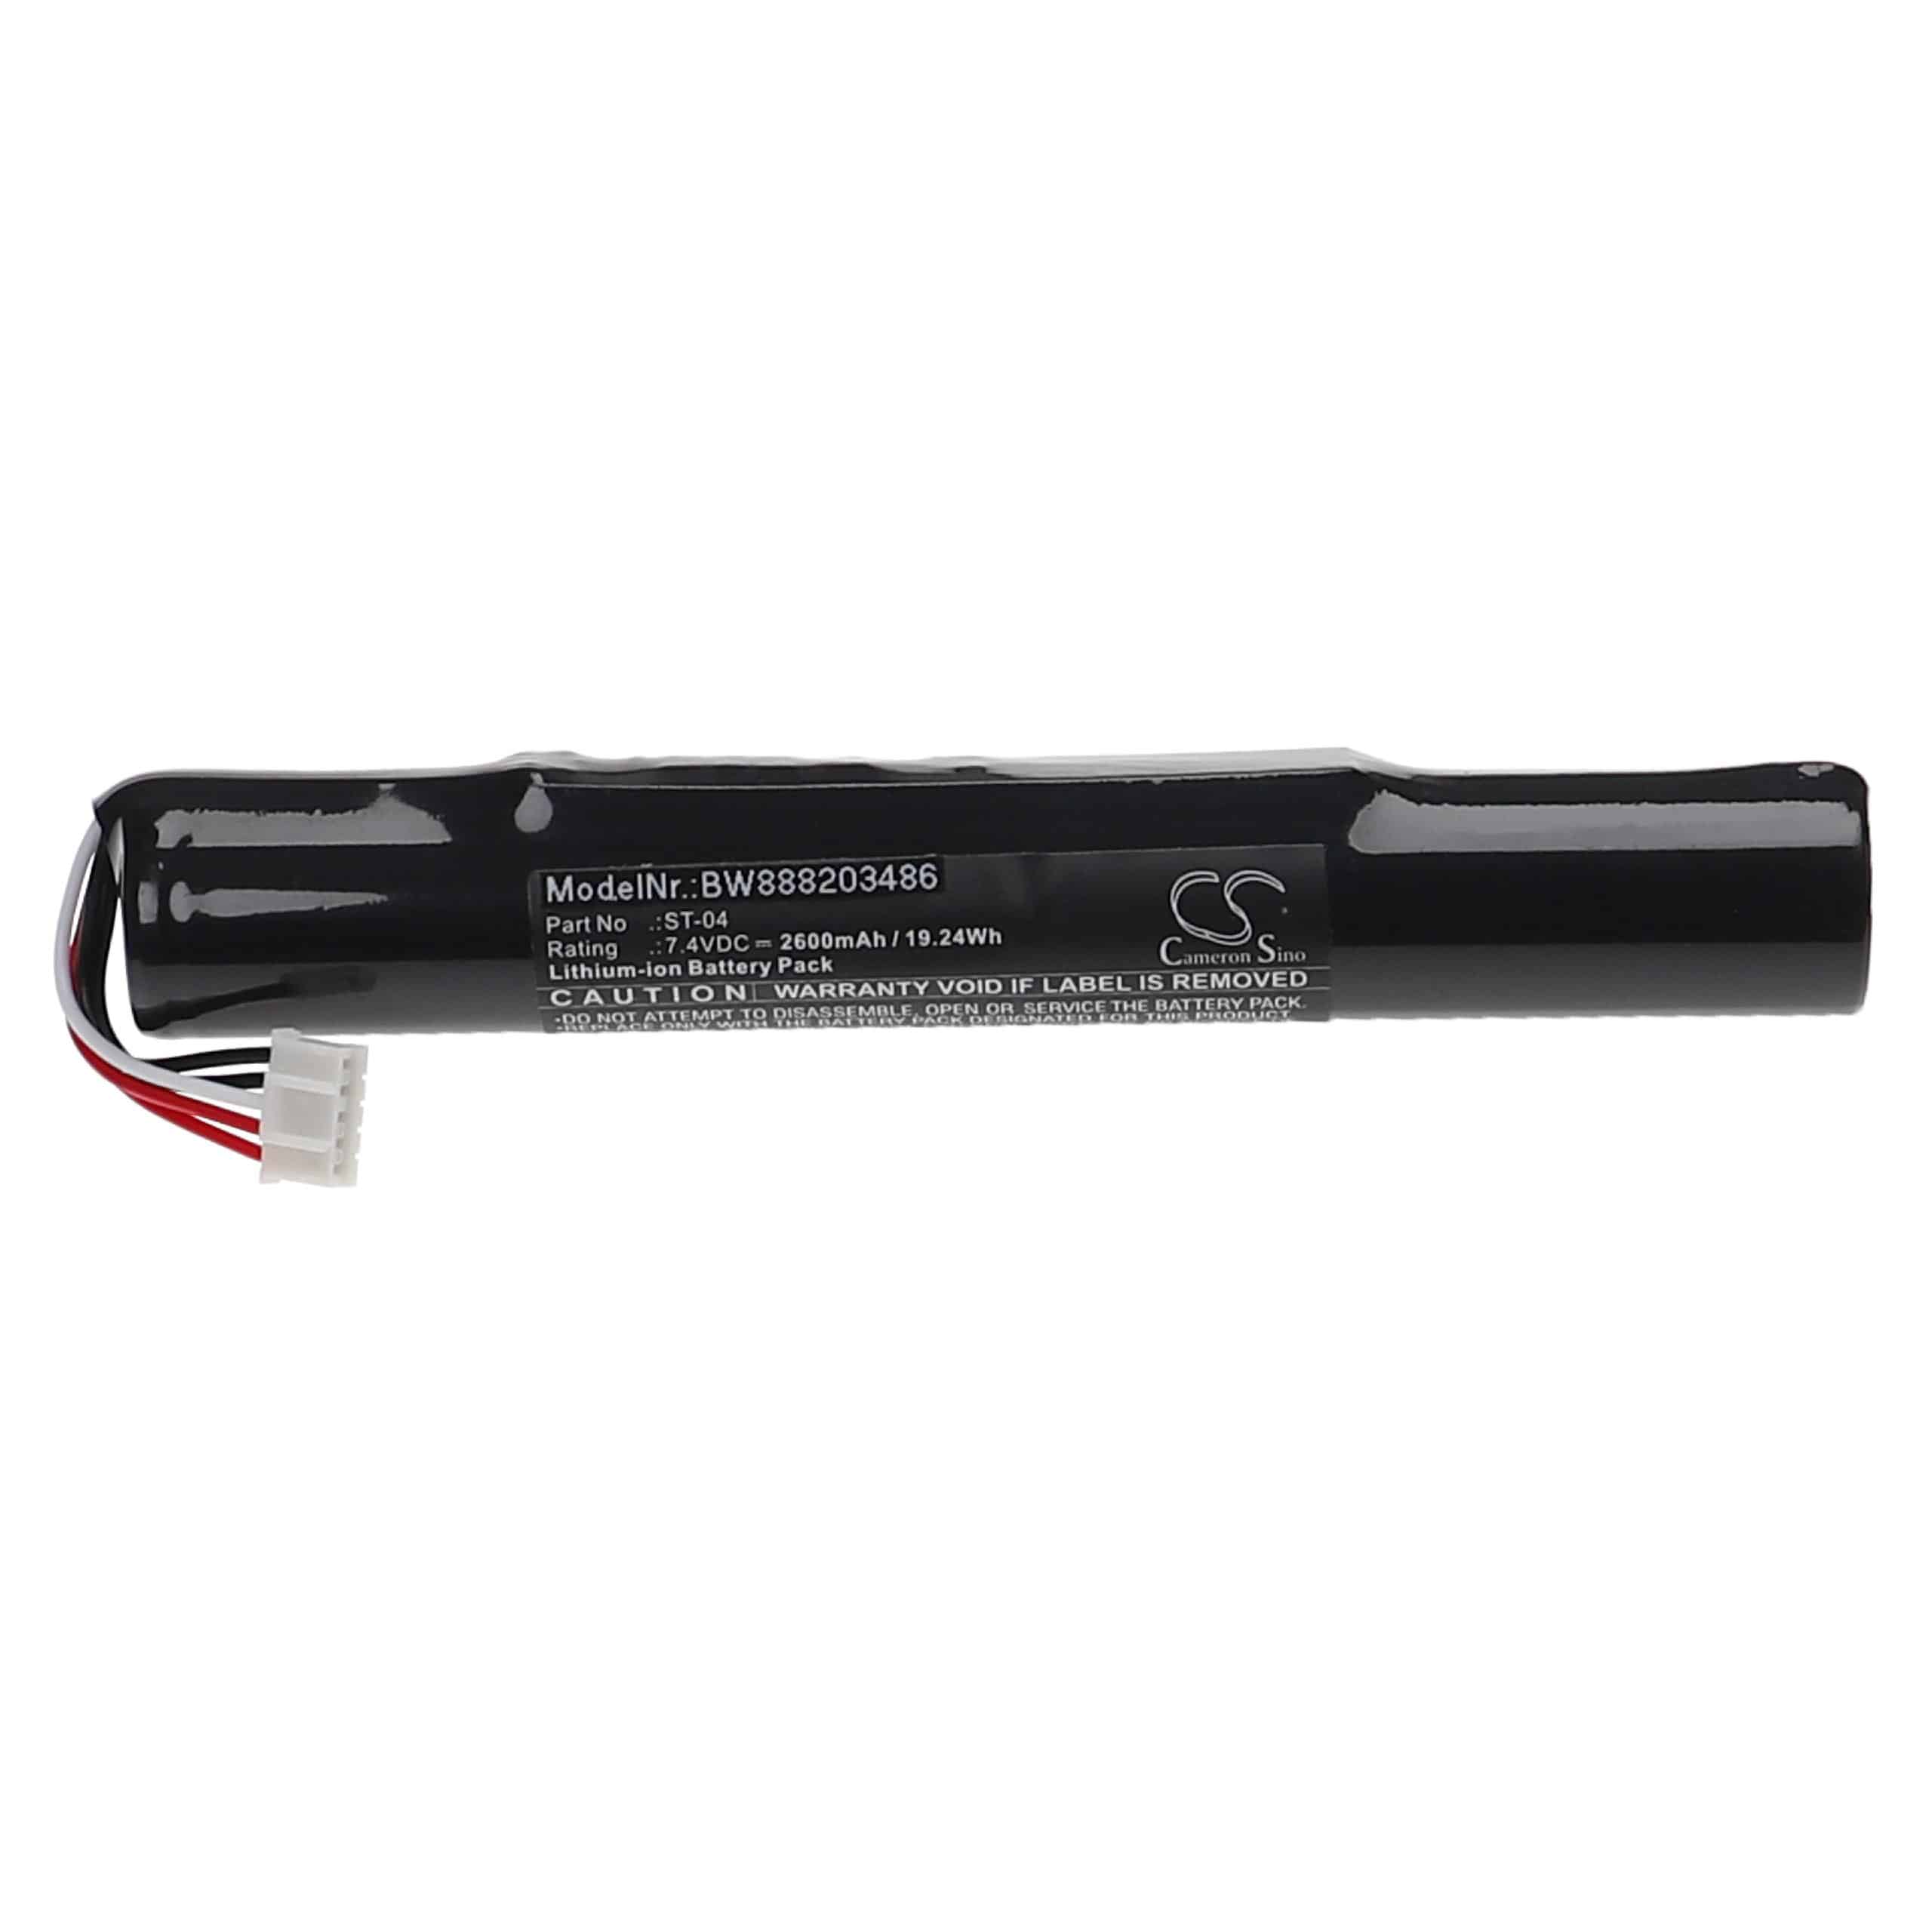  Battery replaces Sony ST-04 for SonyLoudspeaker - Li-Ion 2600 mAh